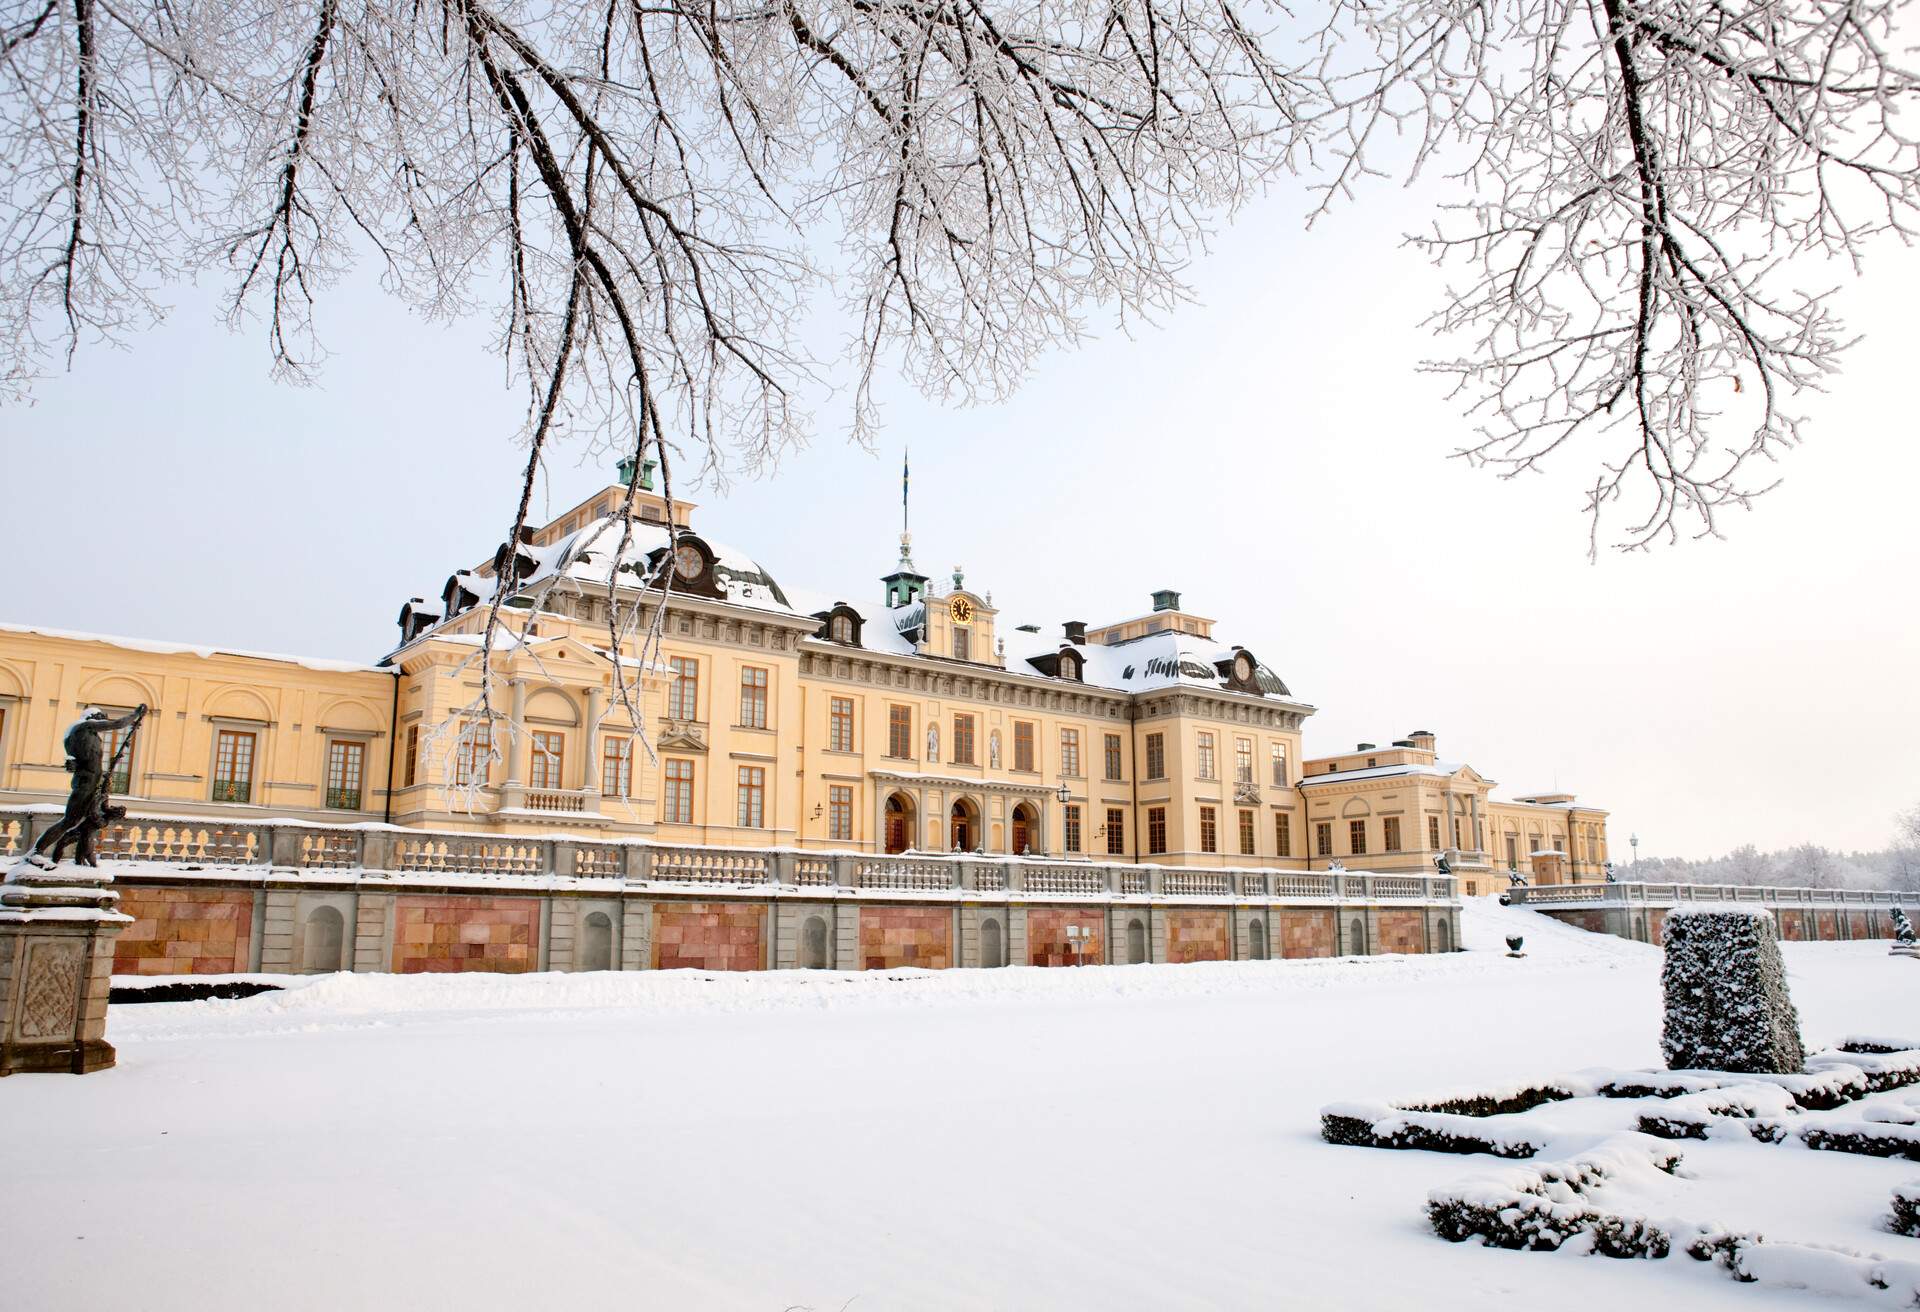 Winter view of the Royal Palace at Drottningholm in Sweden, a UNESCO cultural heritage site.